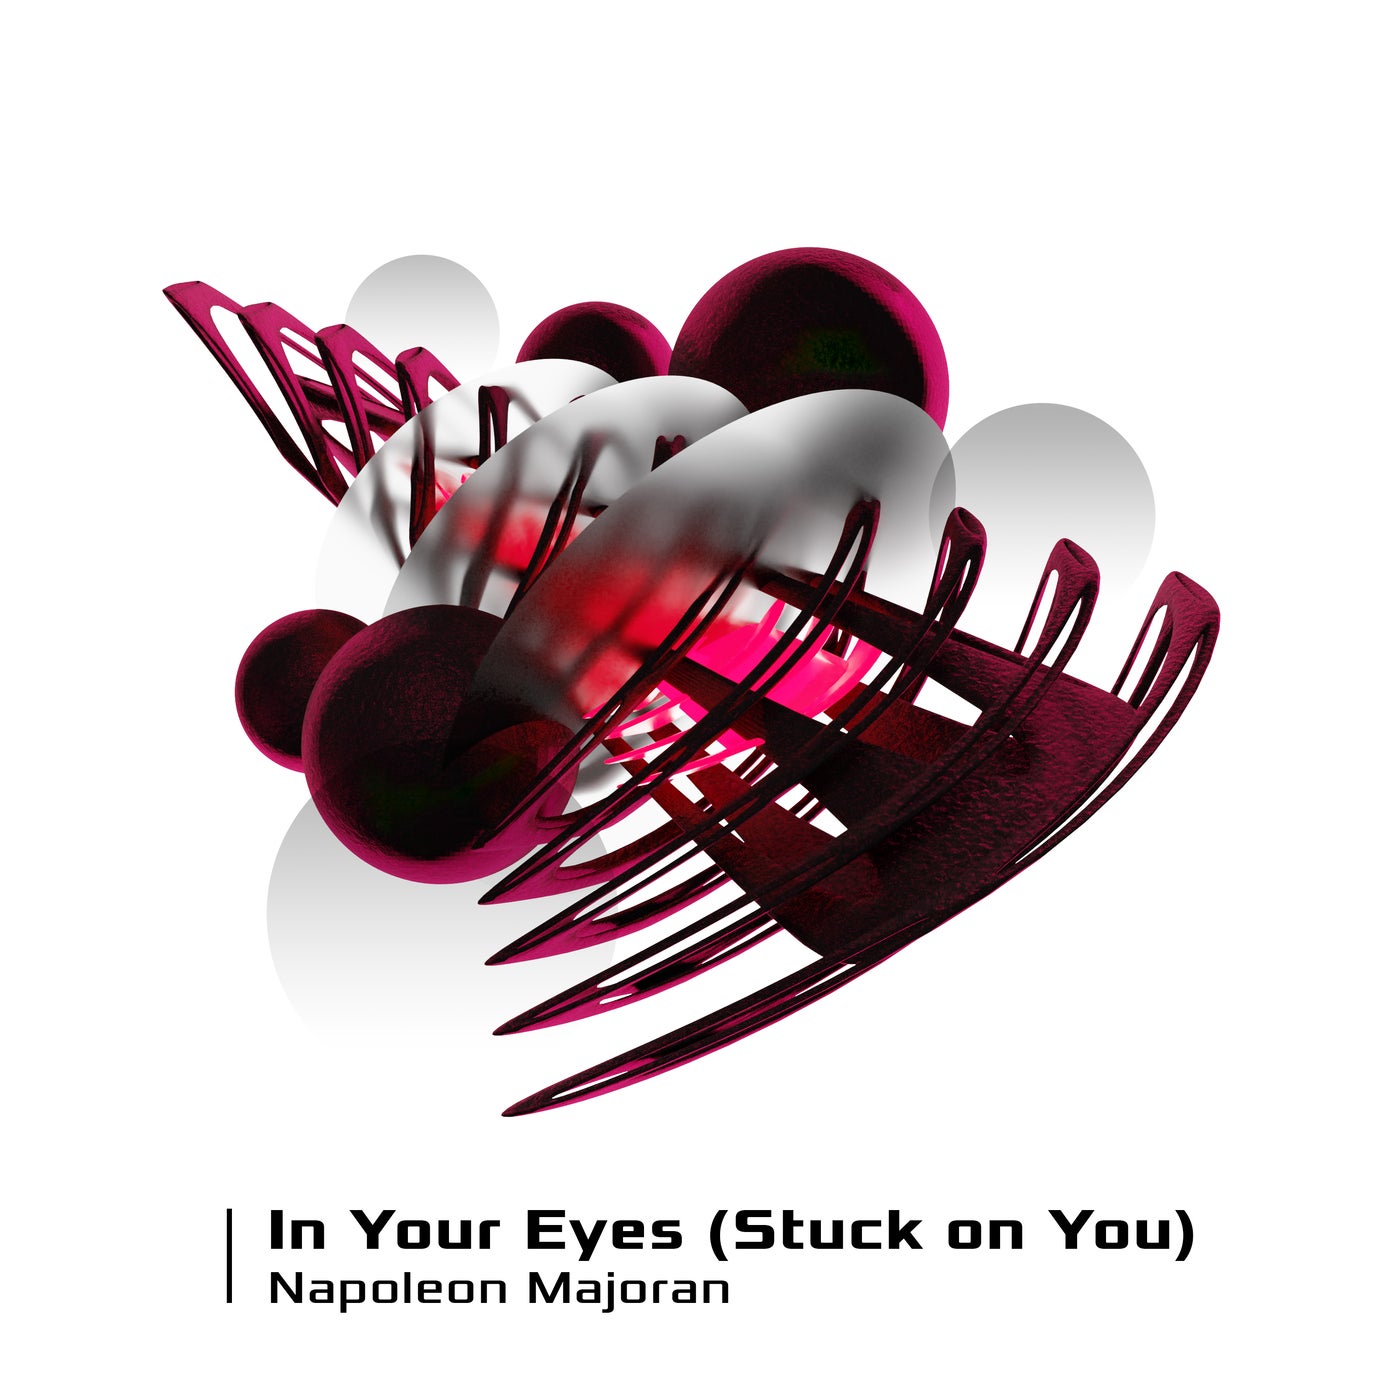 In Your Eyes (Stuck on You)